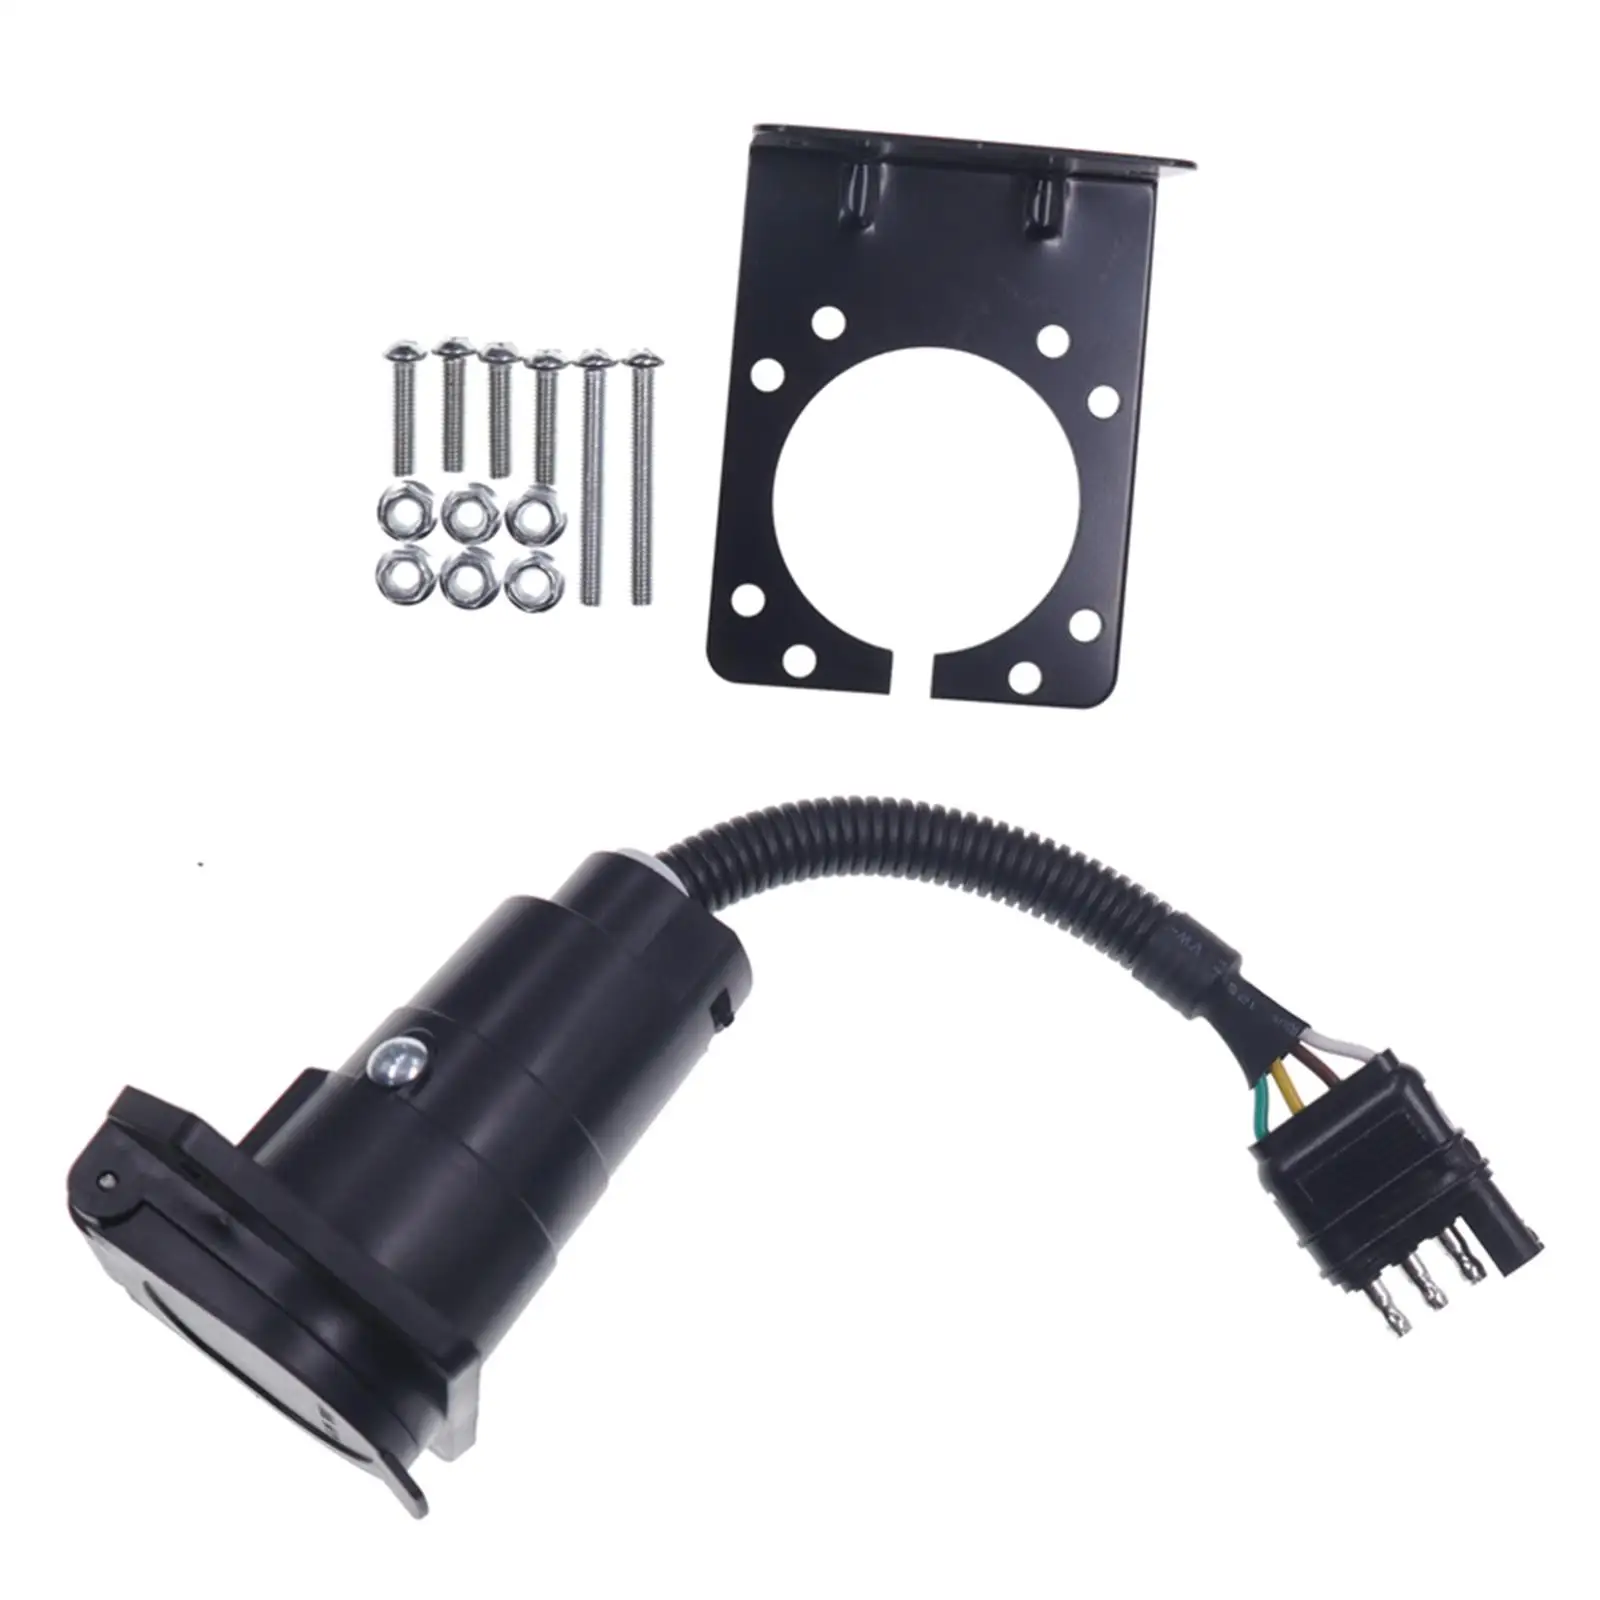 Durable Trailer Light Adapter Plug 4 Pin to 7 Pin Wiring Harness for Tractor Towing Solutions RV Modification Accessory